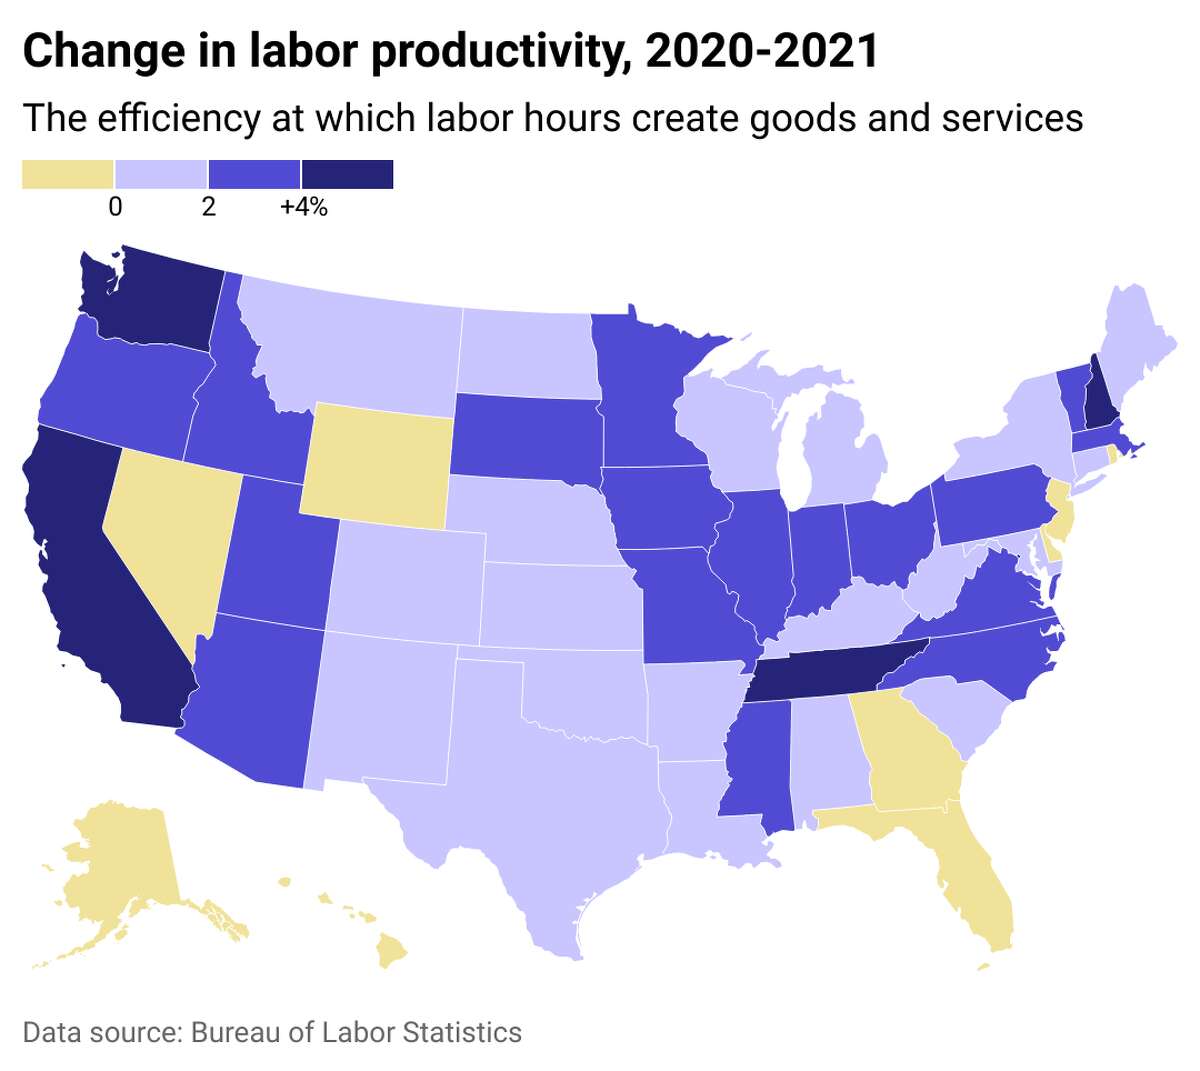 Most states increased labor productivity, but a few saw decreases Areas that are home to fast-growing businesses can be evidence of more rapid productivity growth, according to the Brookings Institute. This information could help explain why California and Washington, home to much of the country's tech presence, saw significant increases in productivity over the first two years of the COVID-19 pandemic. States not traditionally viewed as tech hubs also benefited from dramatic swings in domestic migration that saw urban-dwelling white-collar Americans moving from the crowded, expensive coasts to more affordable states. Tennessee has seen its tech sector blossom in recent years—a trend bolstered by pandemic pressures.